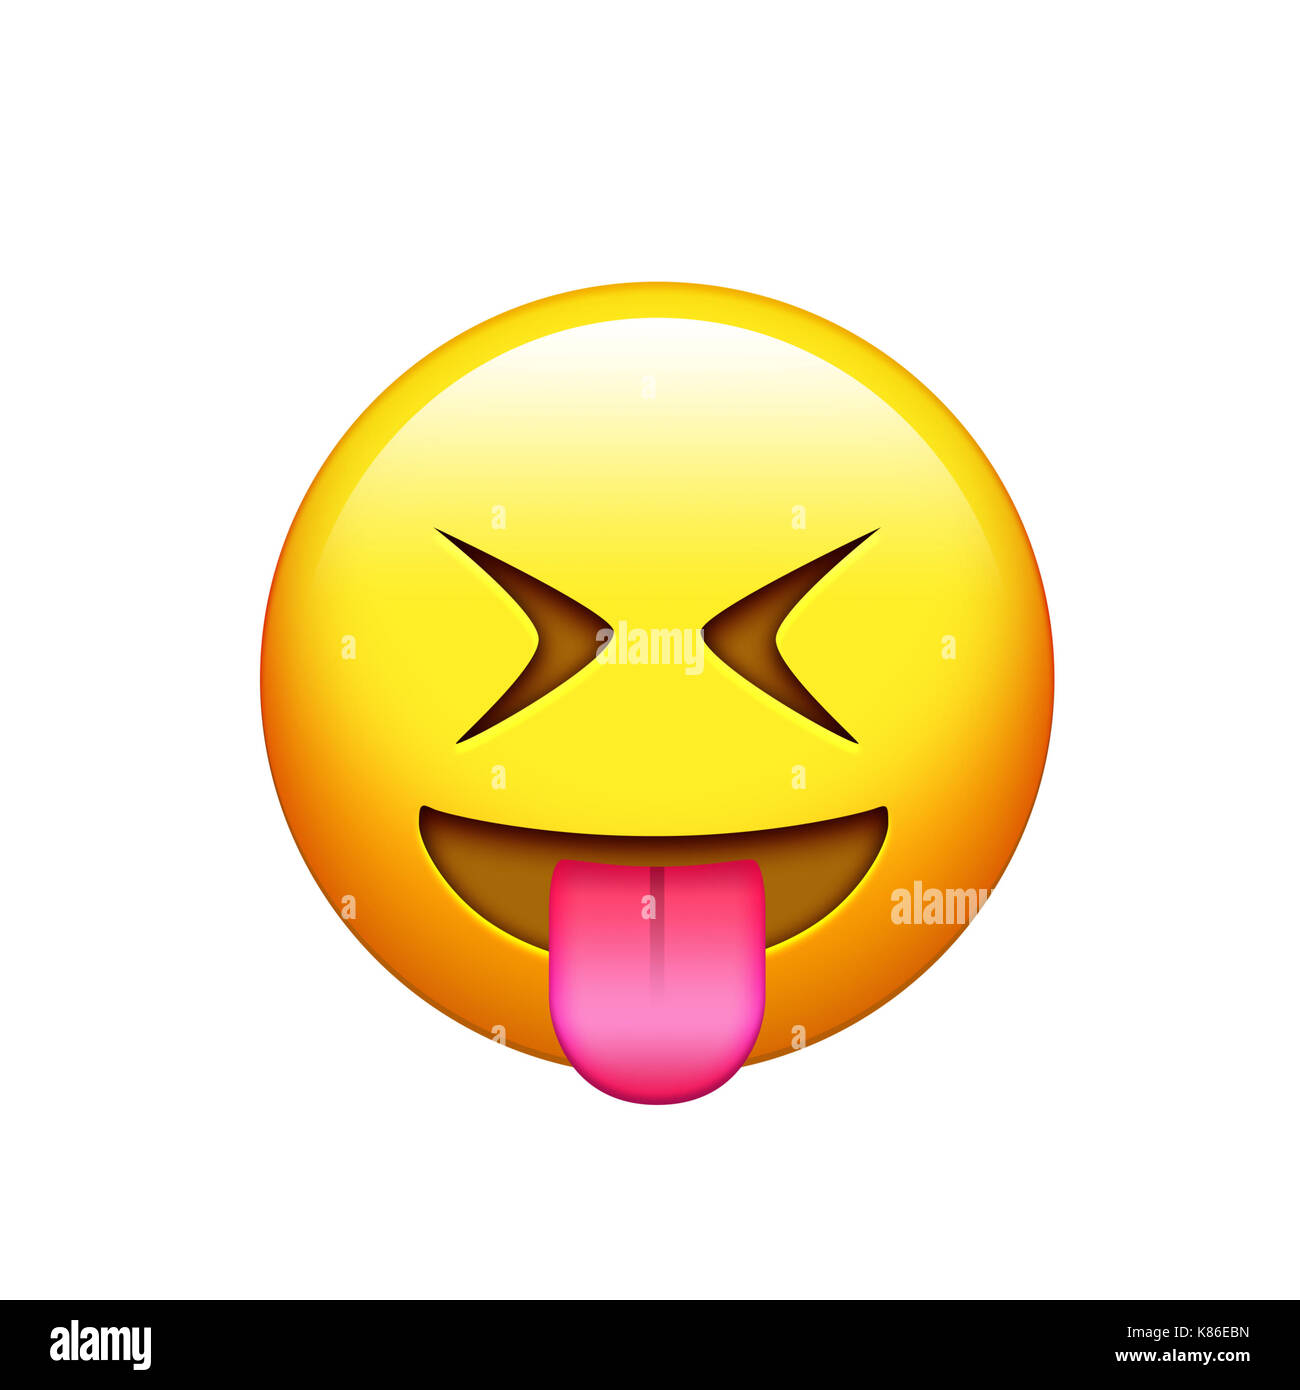 Isolated yellow smiley face with the tongue out and closing eyes icon Stock Photo